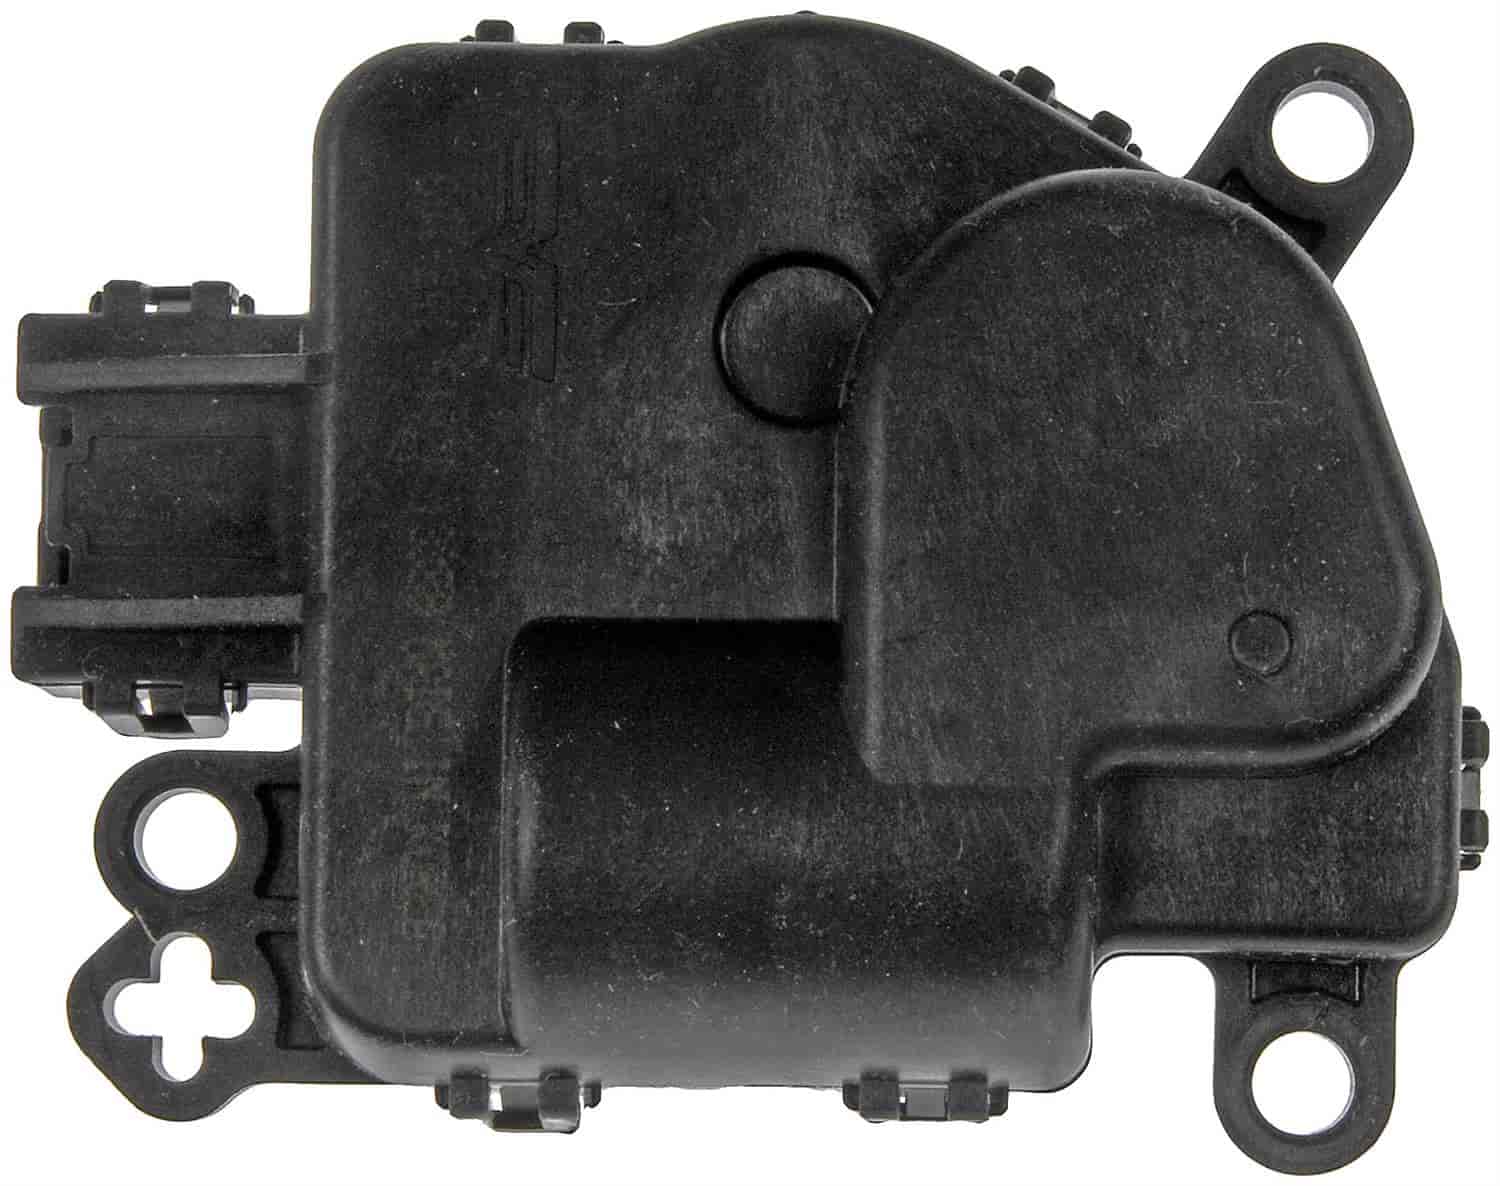 Defrost Air Door Actuator 2006-2017 Lincoln, 2007-2018 Ford, 2008-2011 Mercury - Main/Hybrid Battery Posistion